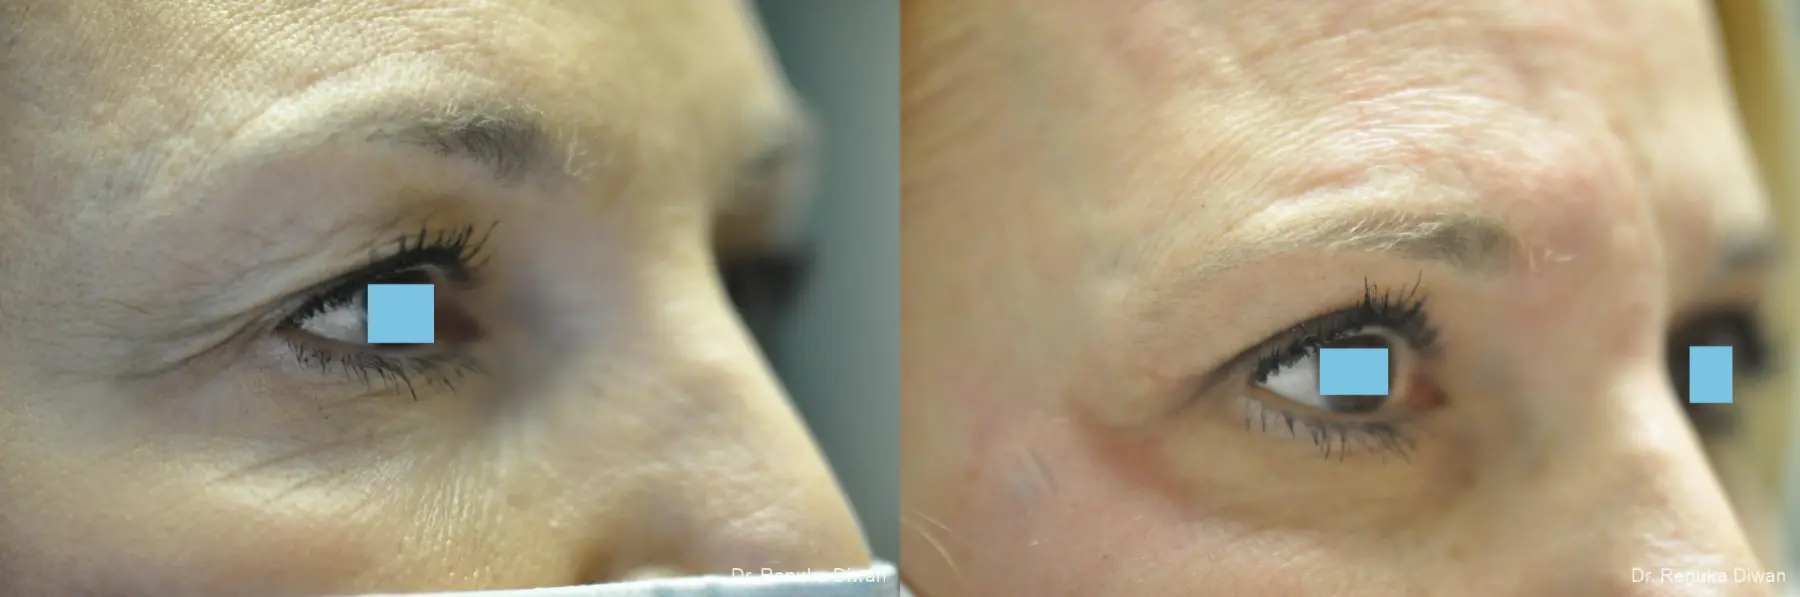 Blepharoplasty: Patient 11 - Before and After 4